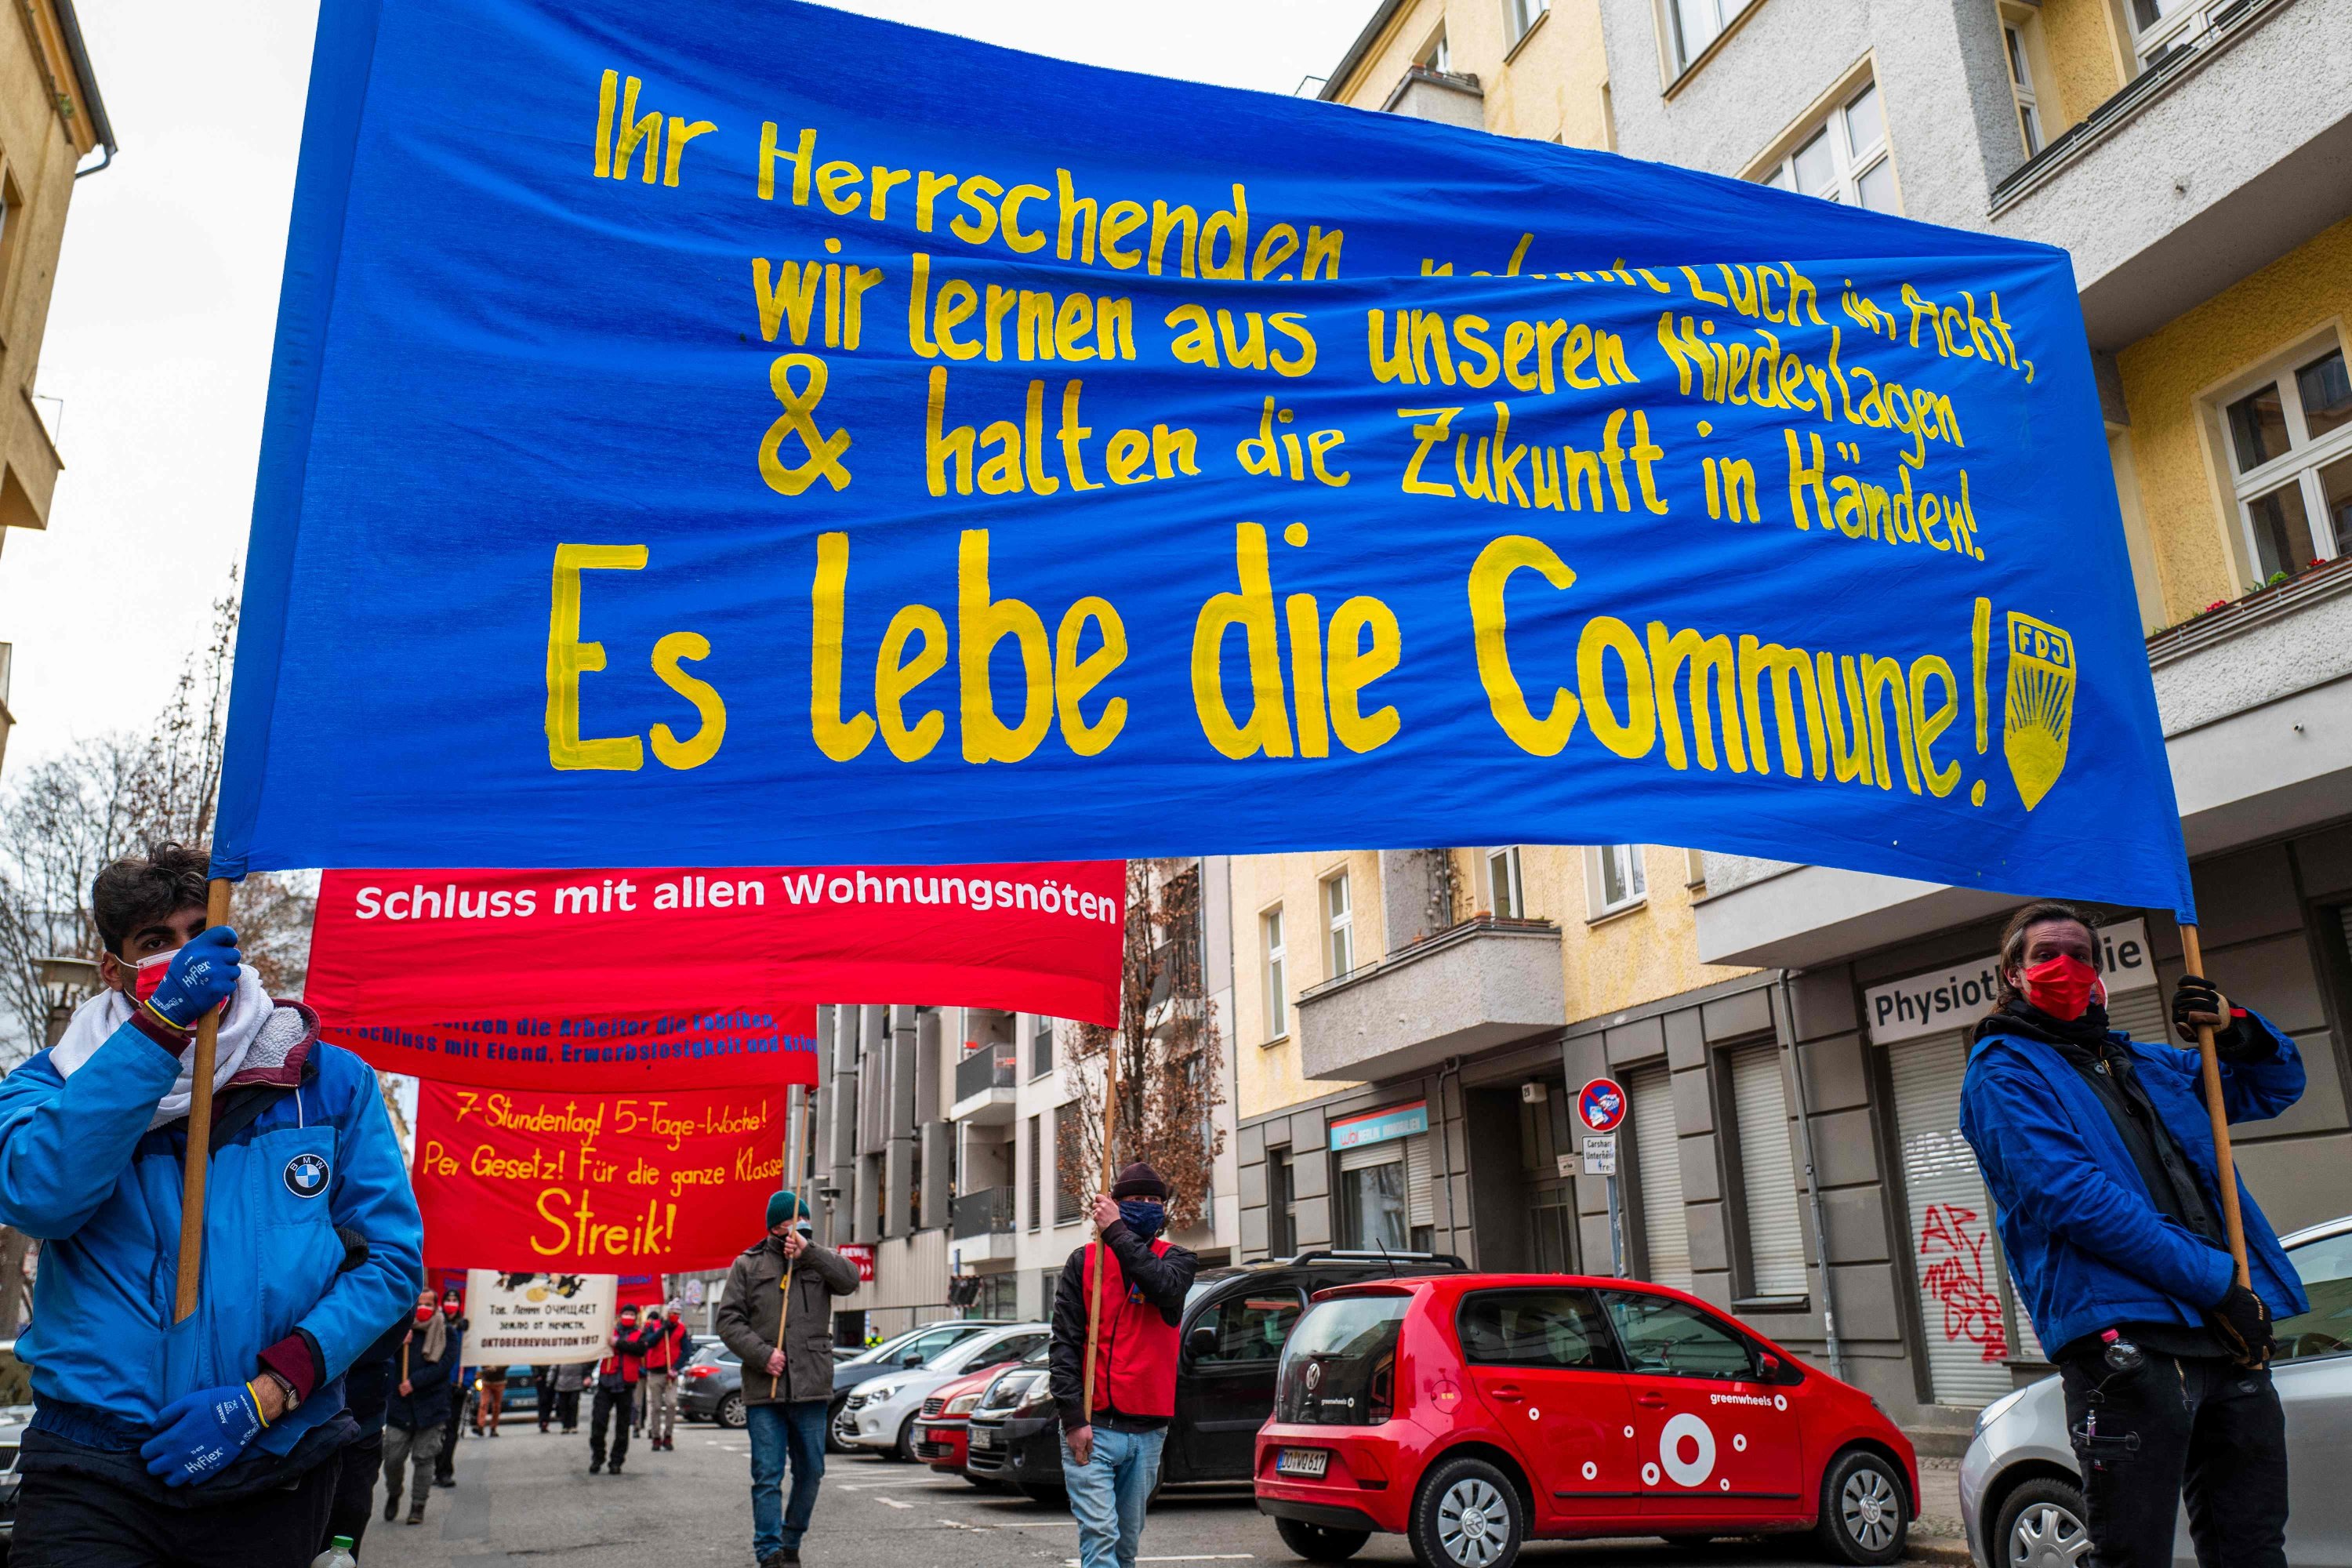 Protesters display a banner reading: The (Paris) Commune lives! during a demonstration by various leftist organizations to commemorate the 150th anniversary of the Paris Commune uprising, in Berlin, Germany, March 20, 2021. (AFP Photo)